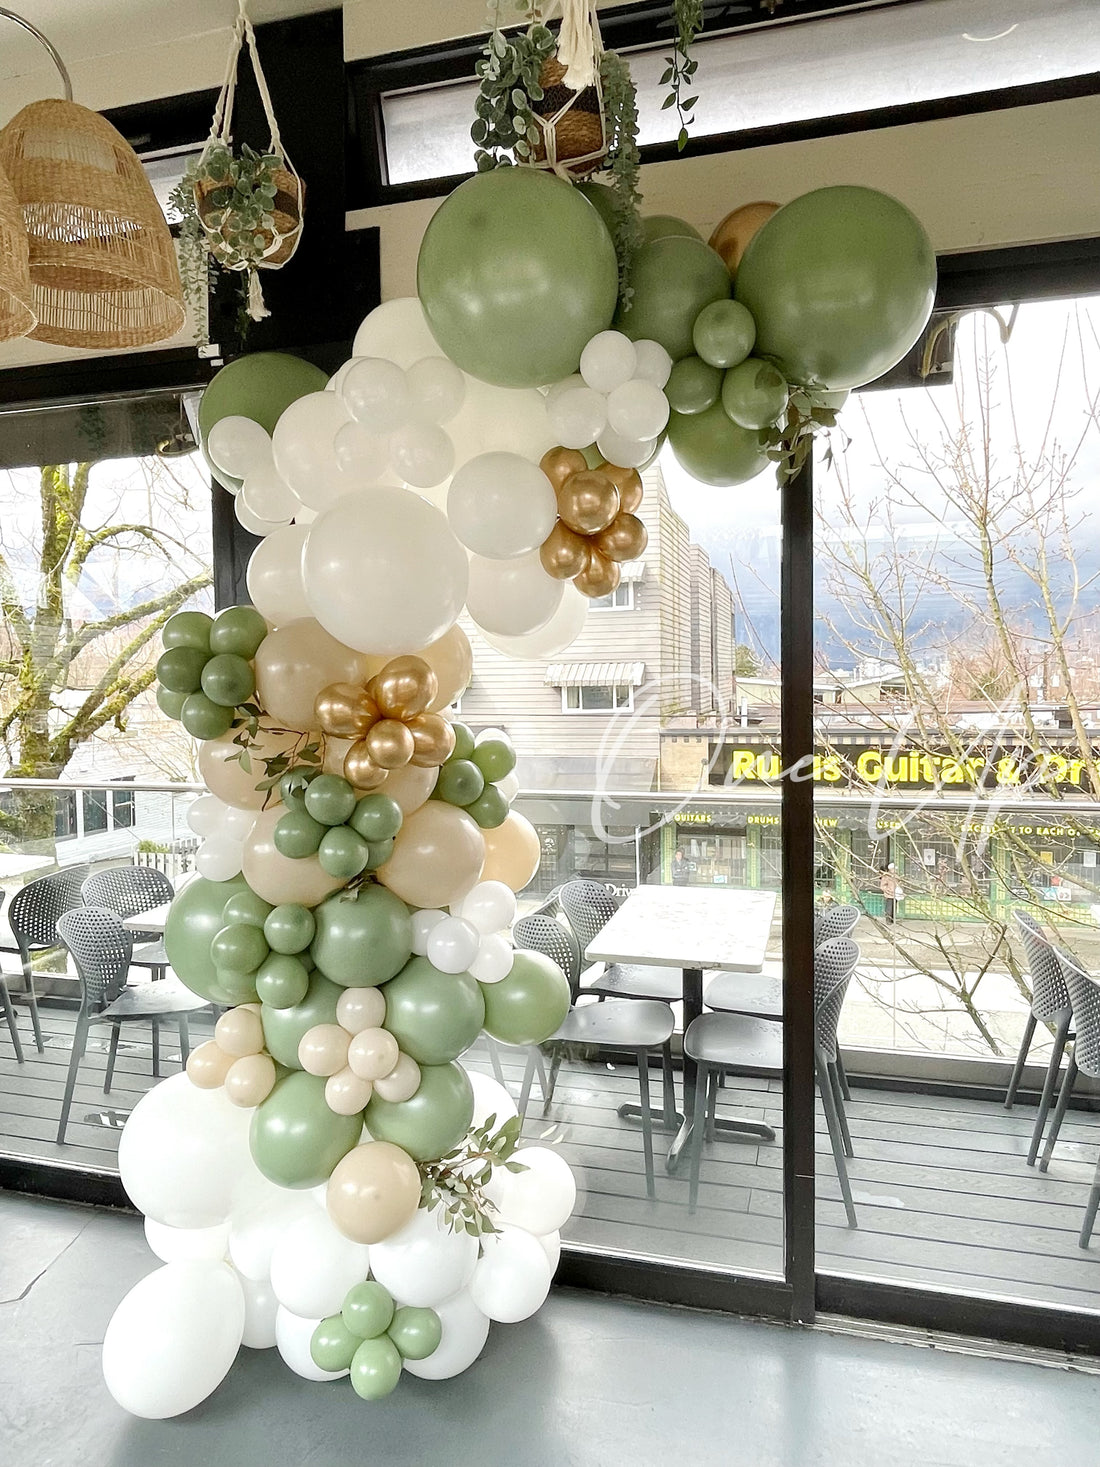 Add a Touch of One Up's Eucalyptus Greenery Balloons to your party